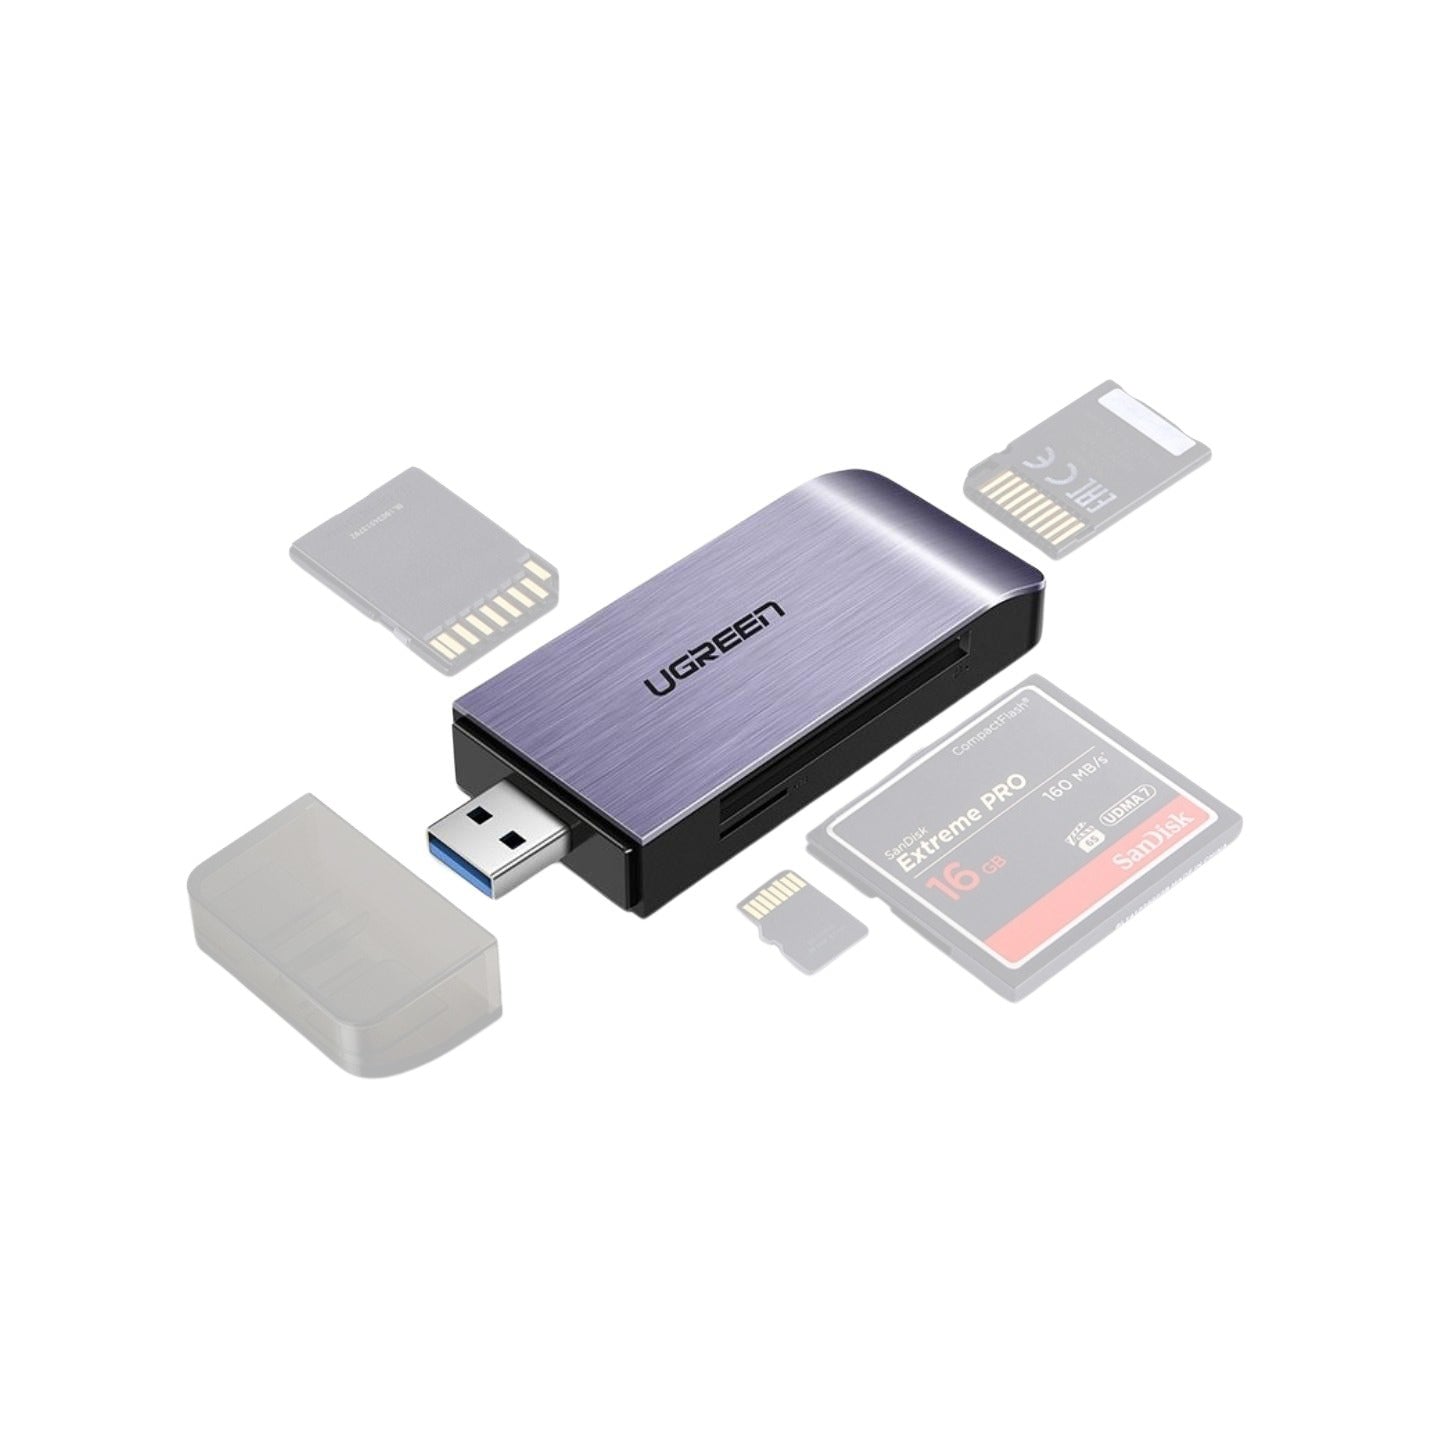 Ugreen 4-in-1 USB 3.0 to SD CF TF MS Card Adapter – UGREEN